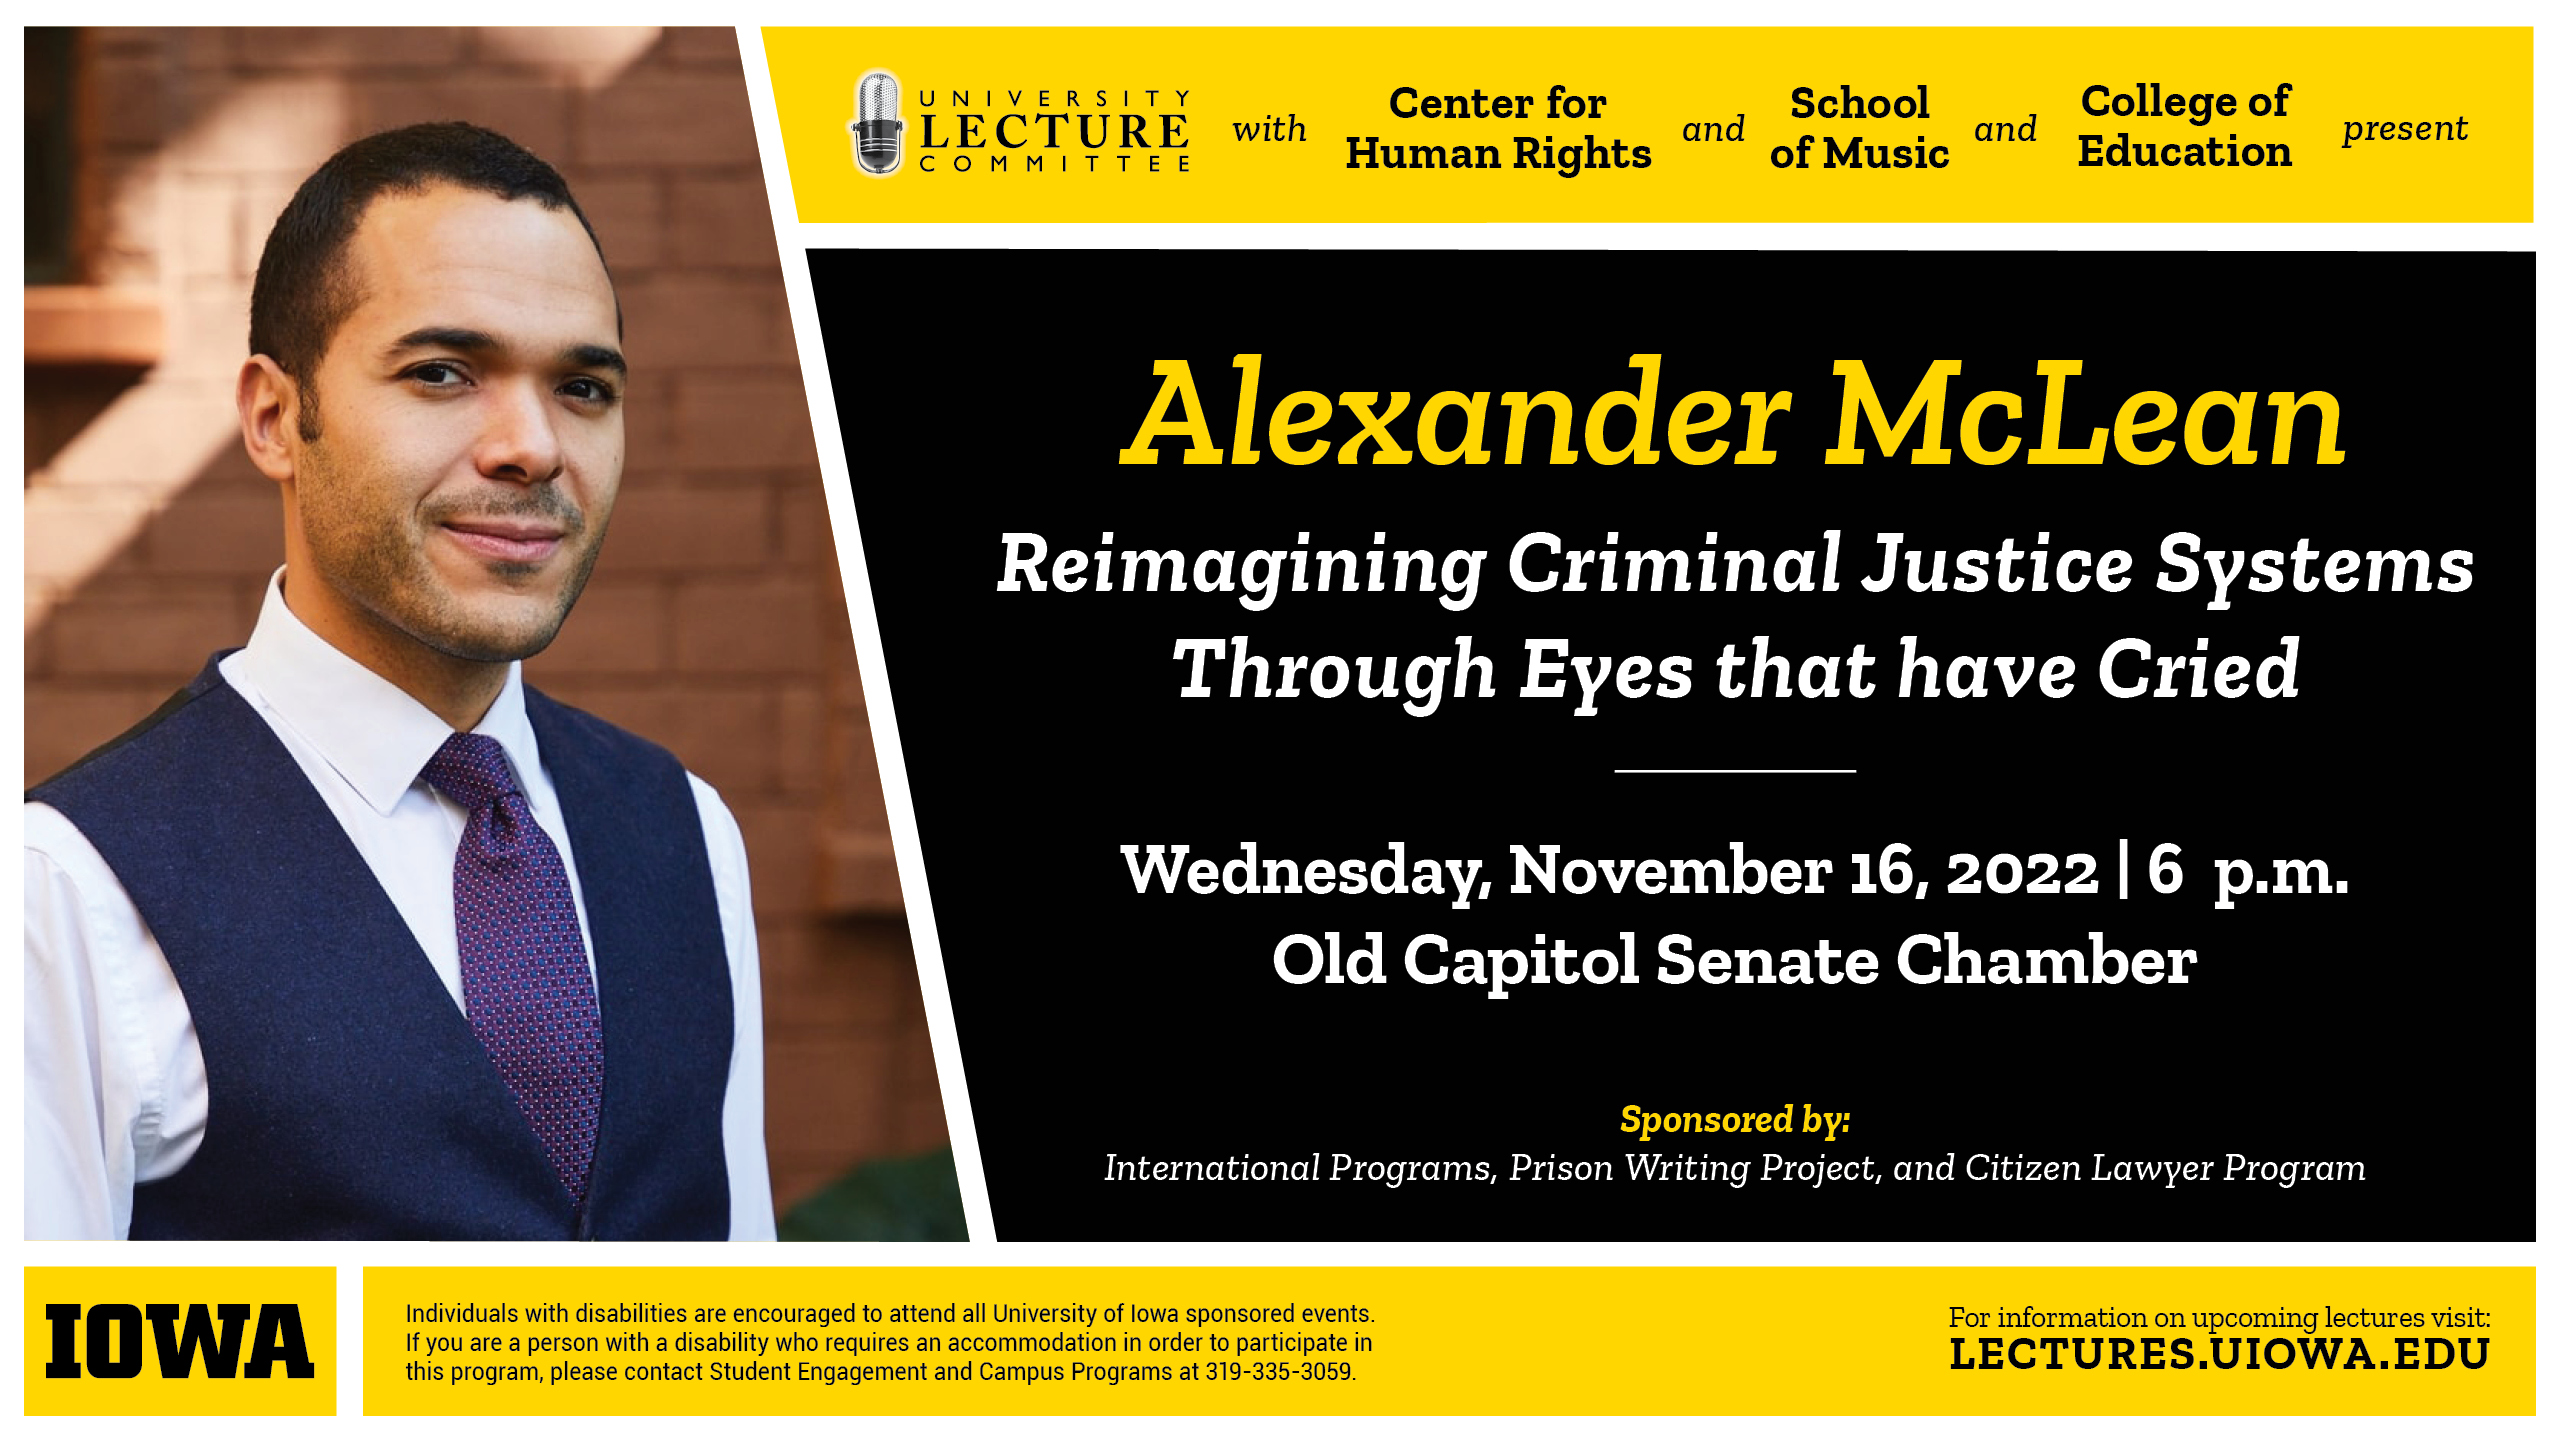 Alexander McLean Reimagining Criminal Justice Systems through eyes that have cried. Wednesday, November 15, 2022 at 6pm at the Old Capitol Senate Chamber